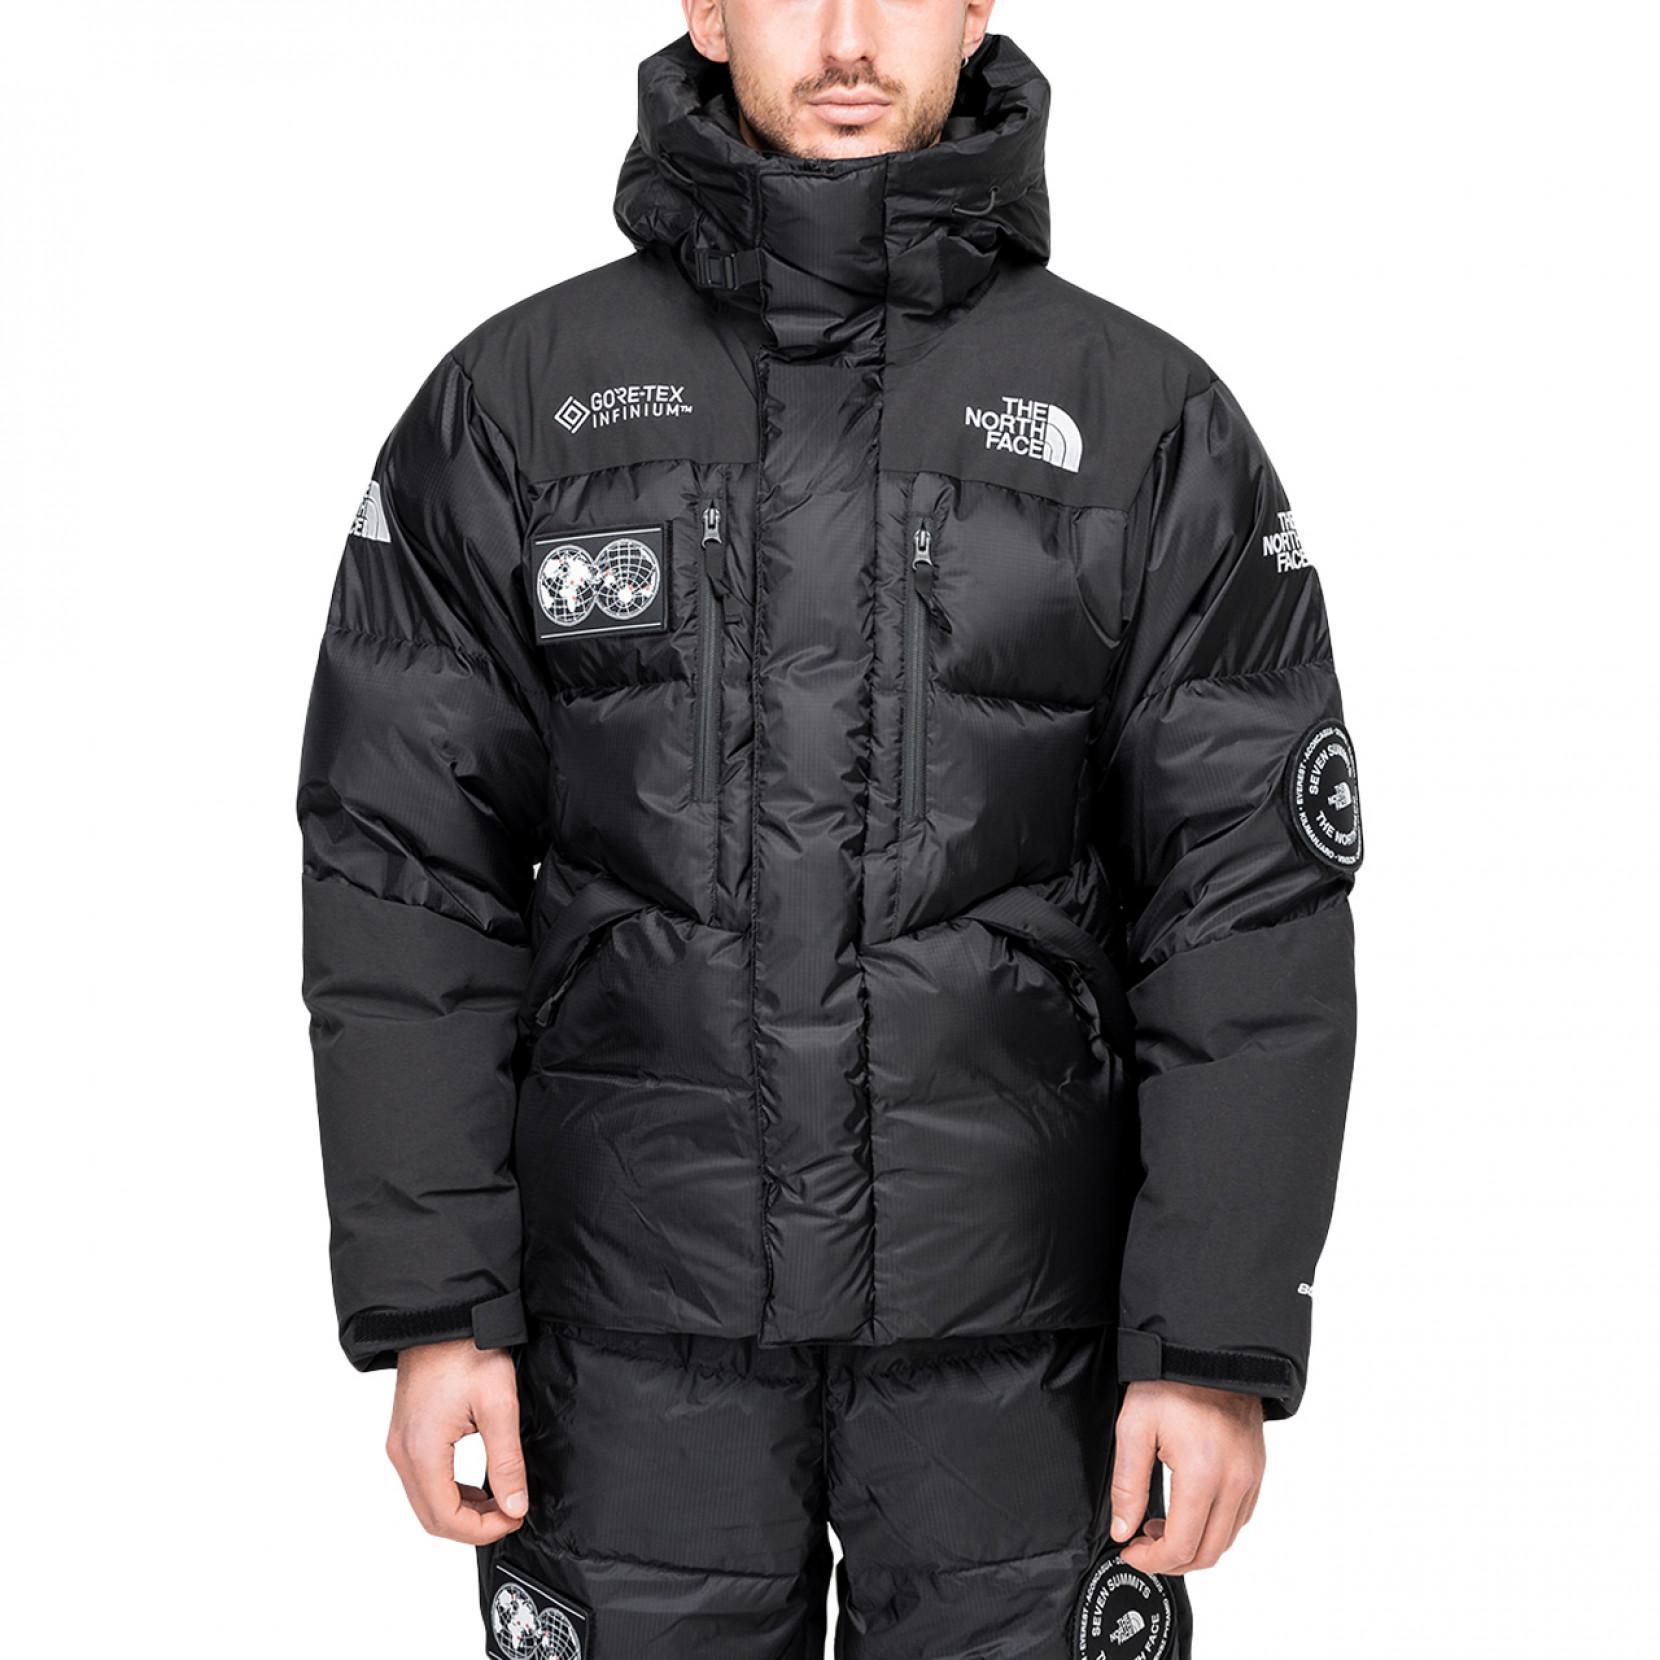 The North Face Himalayan Parka Flash Sales, 58% OFF | empow-her.com